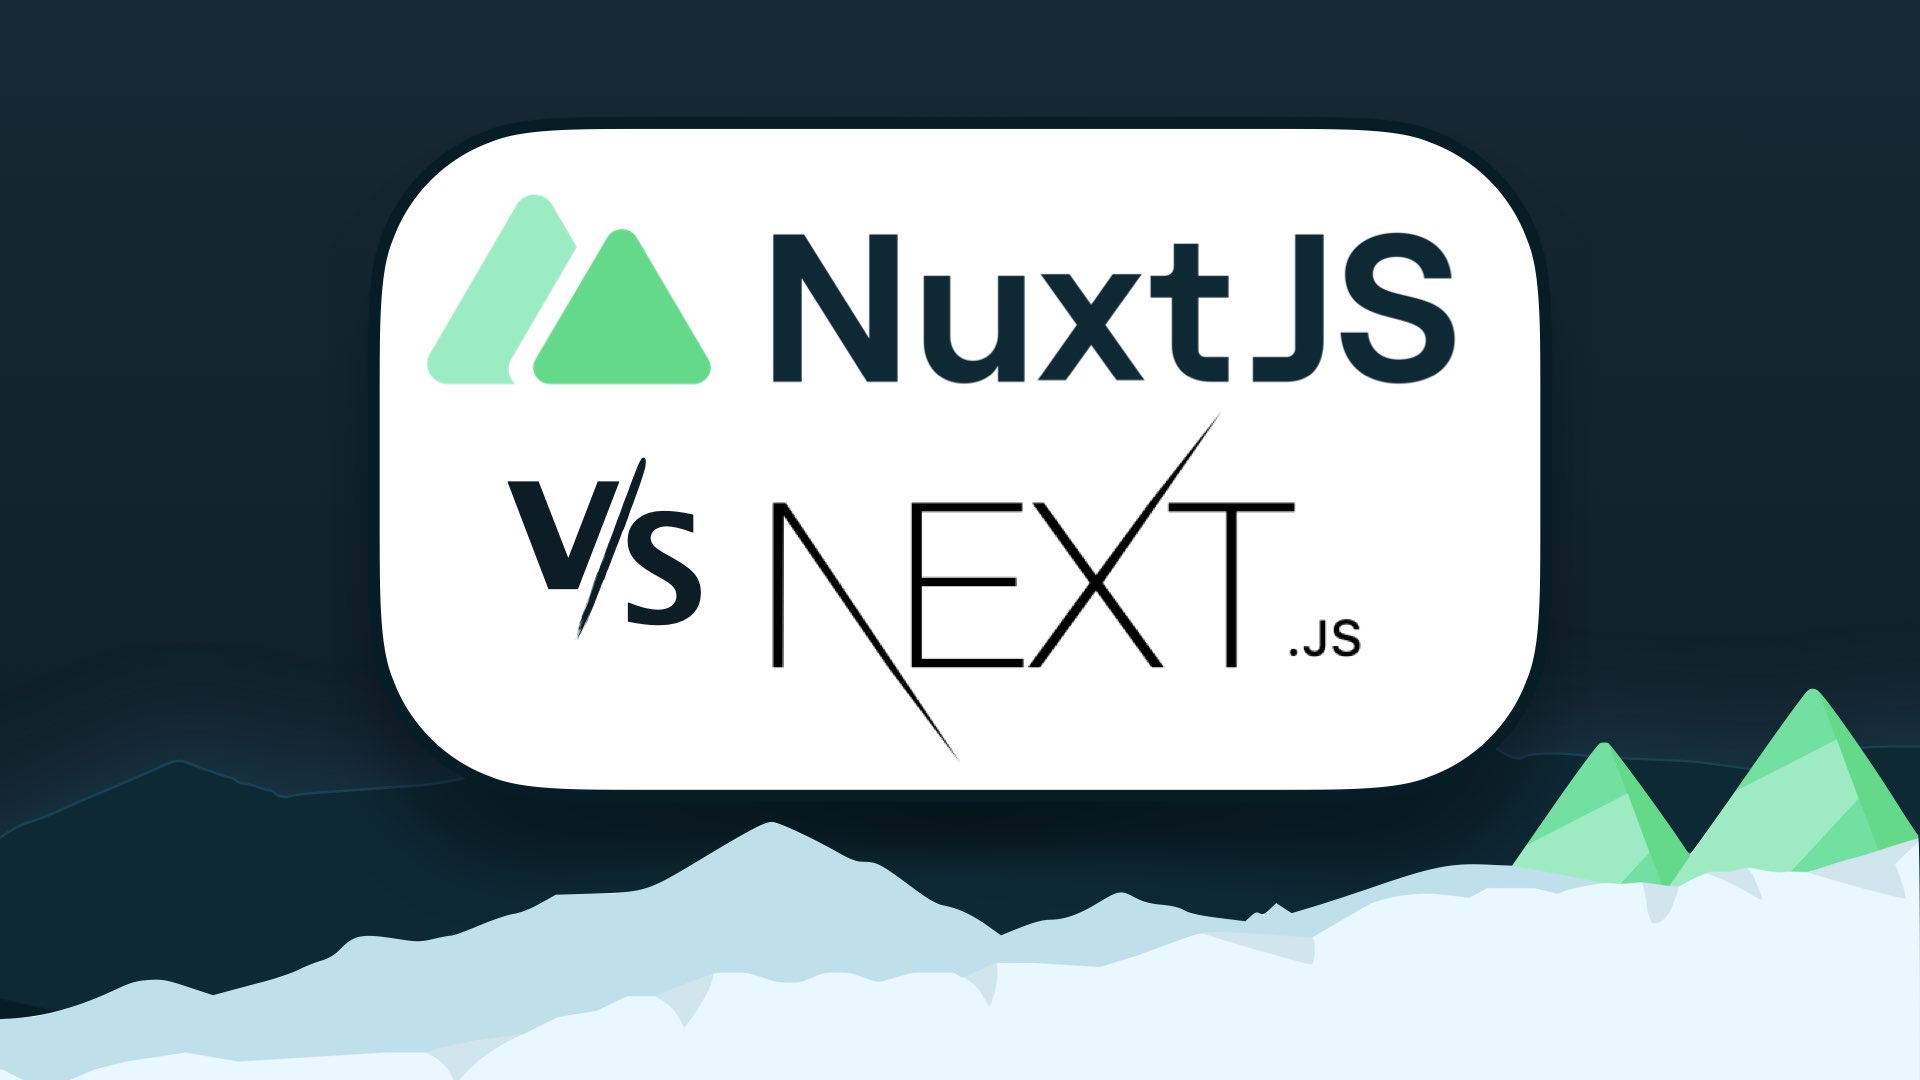 Nuxt vs Next - How do they compare?